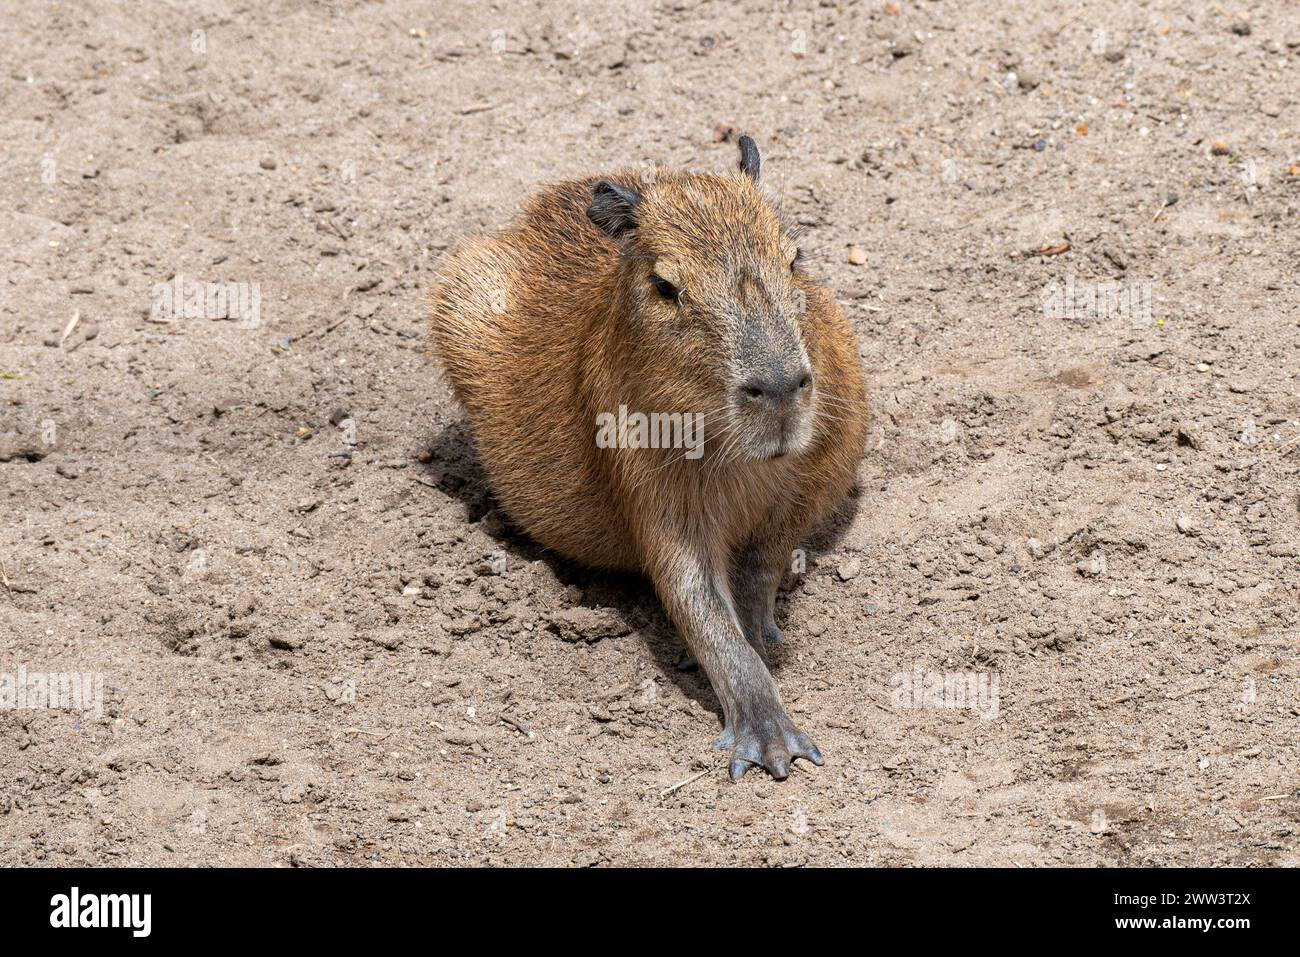 Capybara lounging in the sand, enjoying a well-deserved rest. Stock Photo